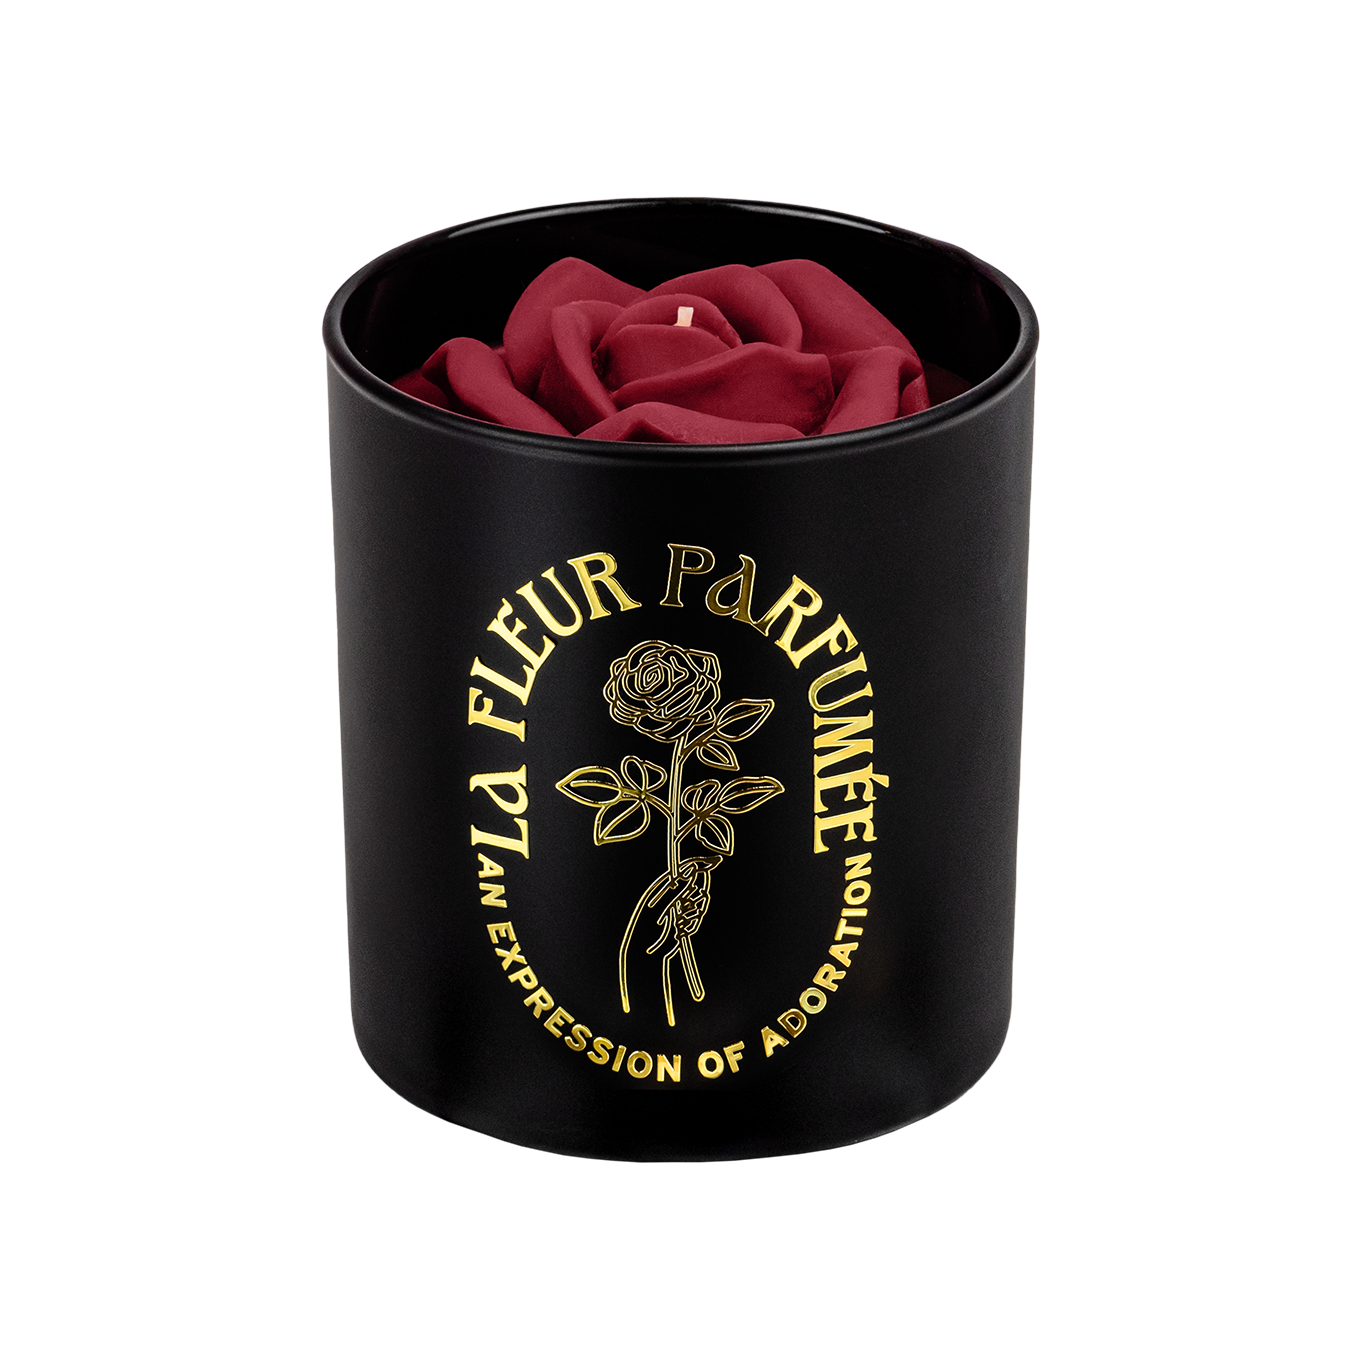 An elegant luxurious black candle with a gold emblem that reads La Fleur Parfumée An Expression of Adoration, and is topped with a red sculpted wax rose